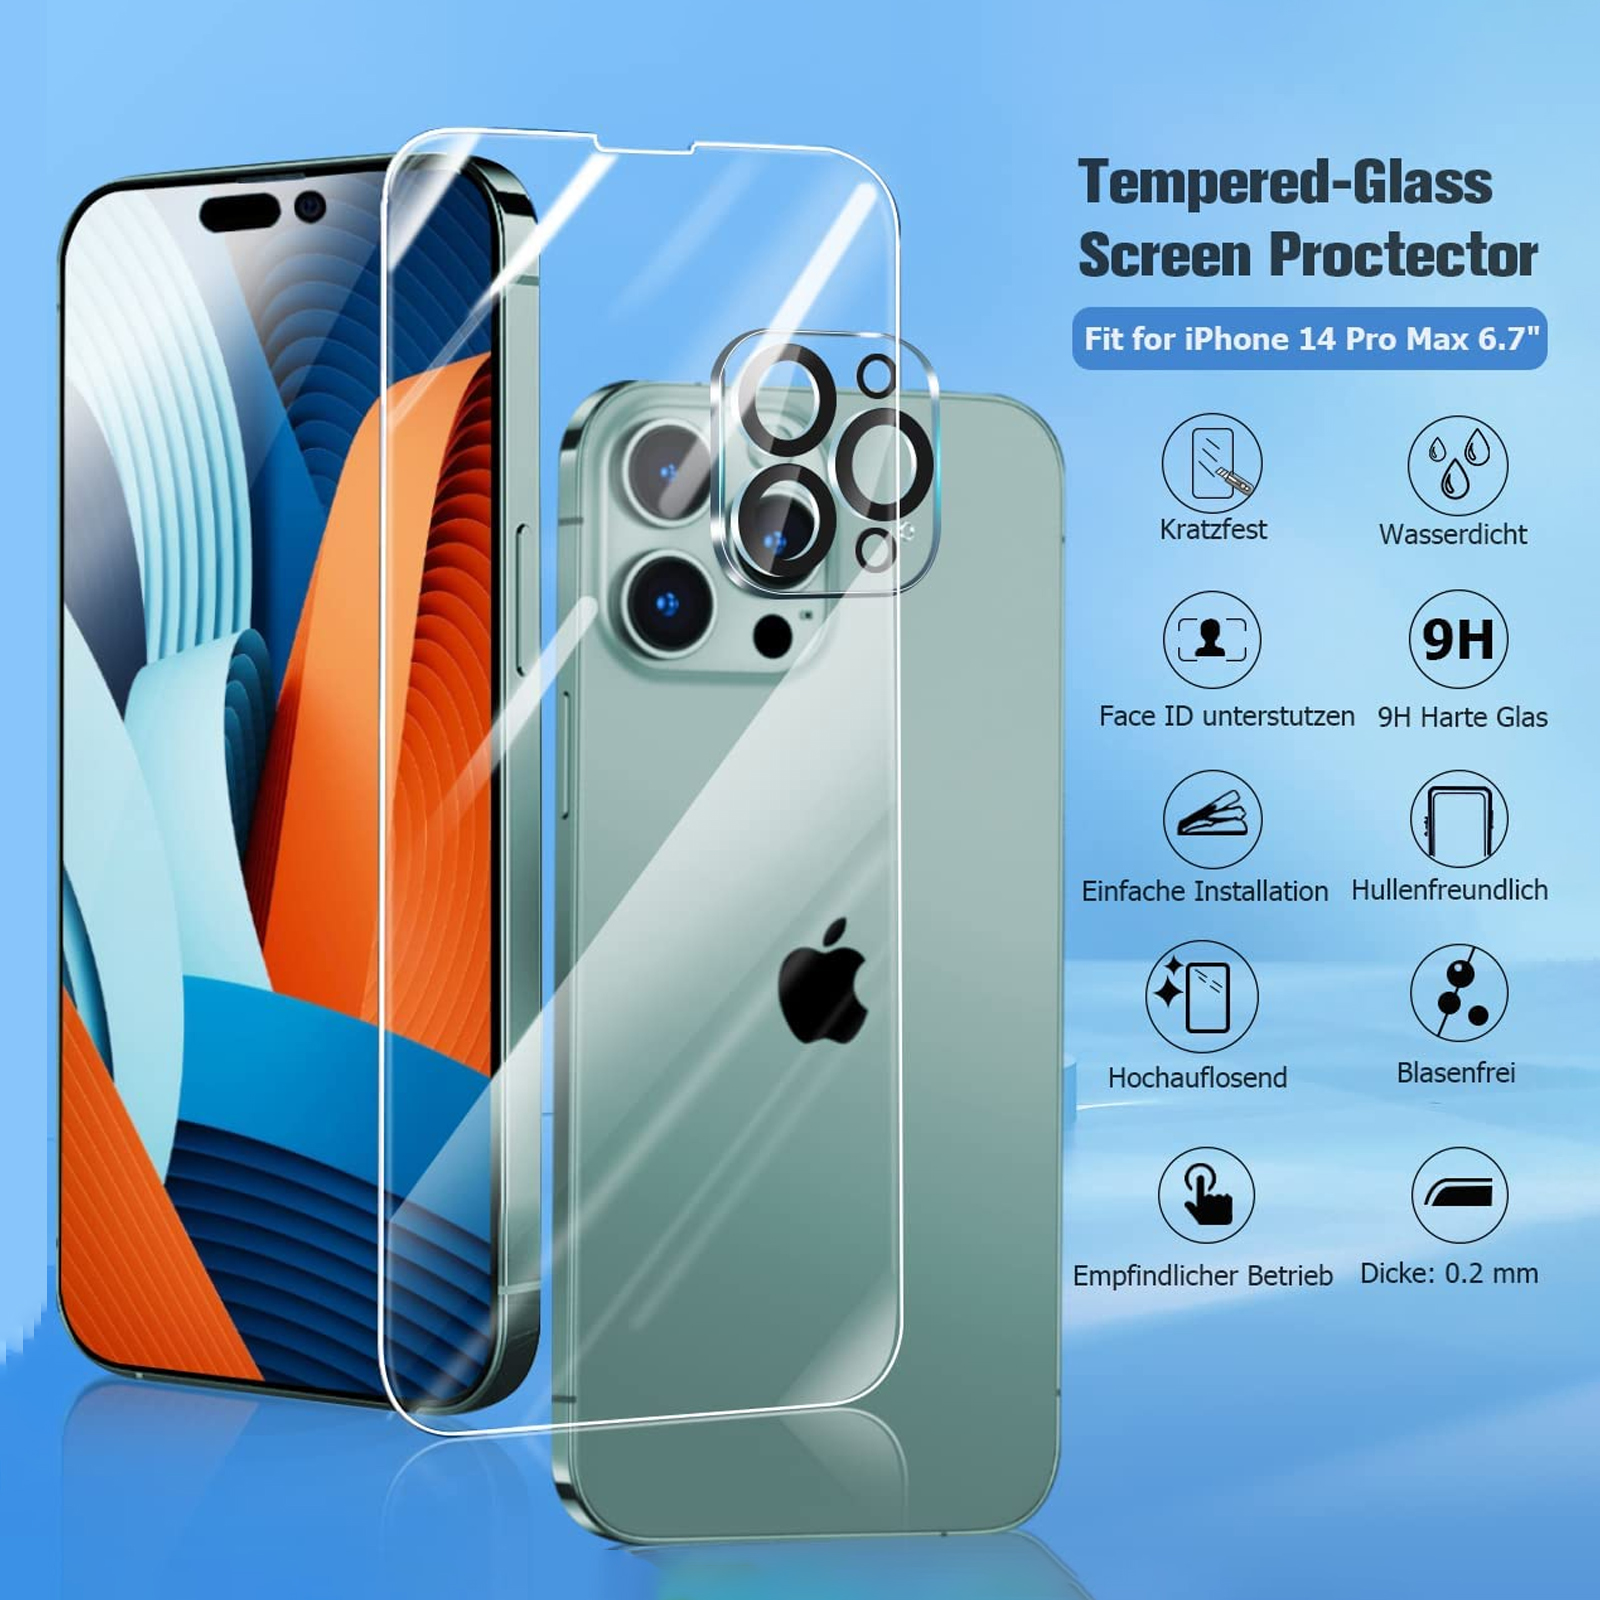 iPhone 11 Pro Max Screen Protection Film, Ultra Slim 0.2mm, Tempered Glass  Pro